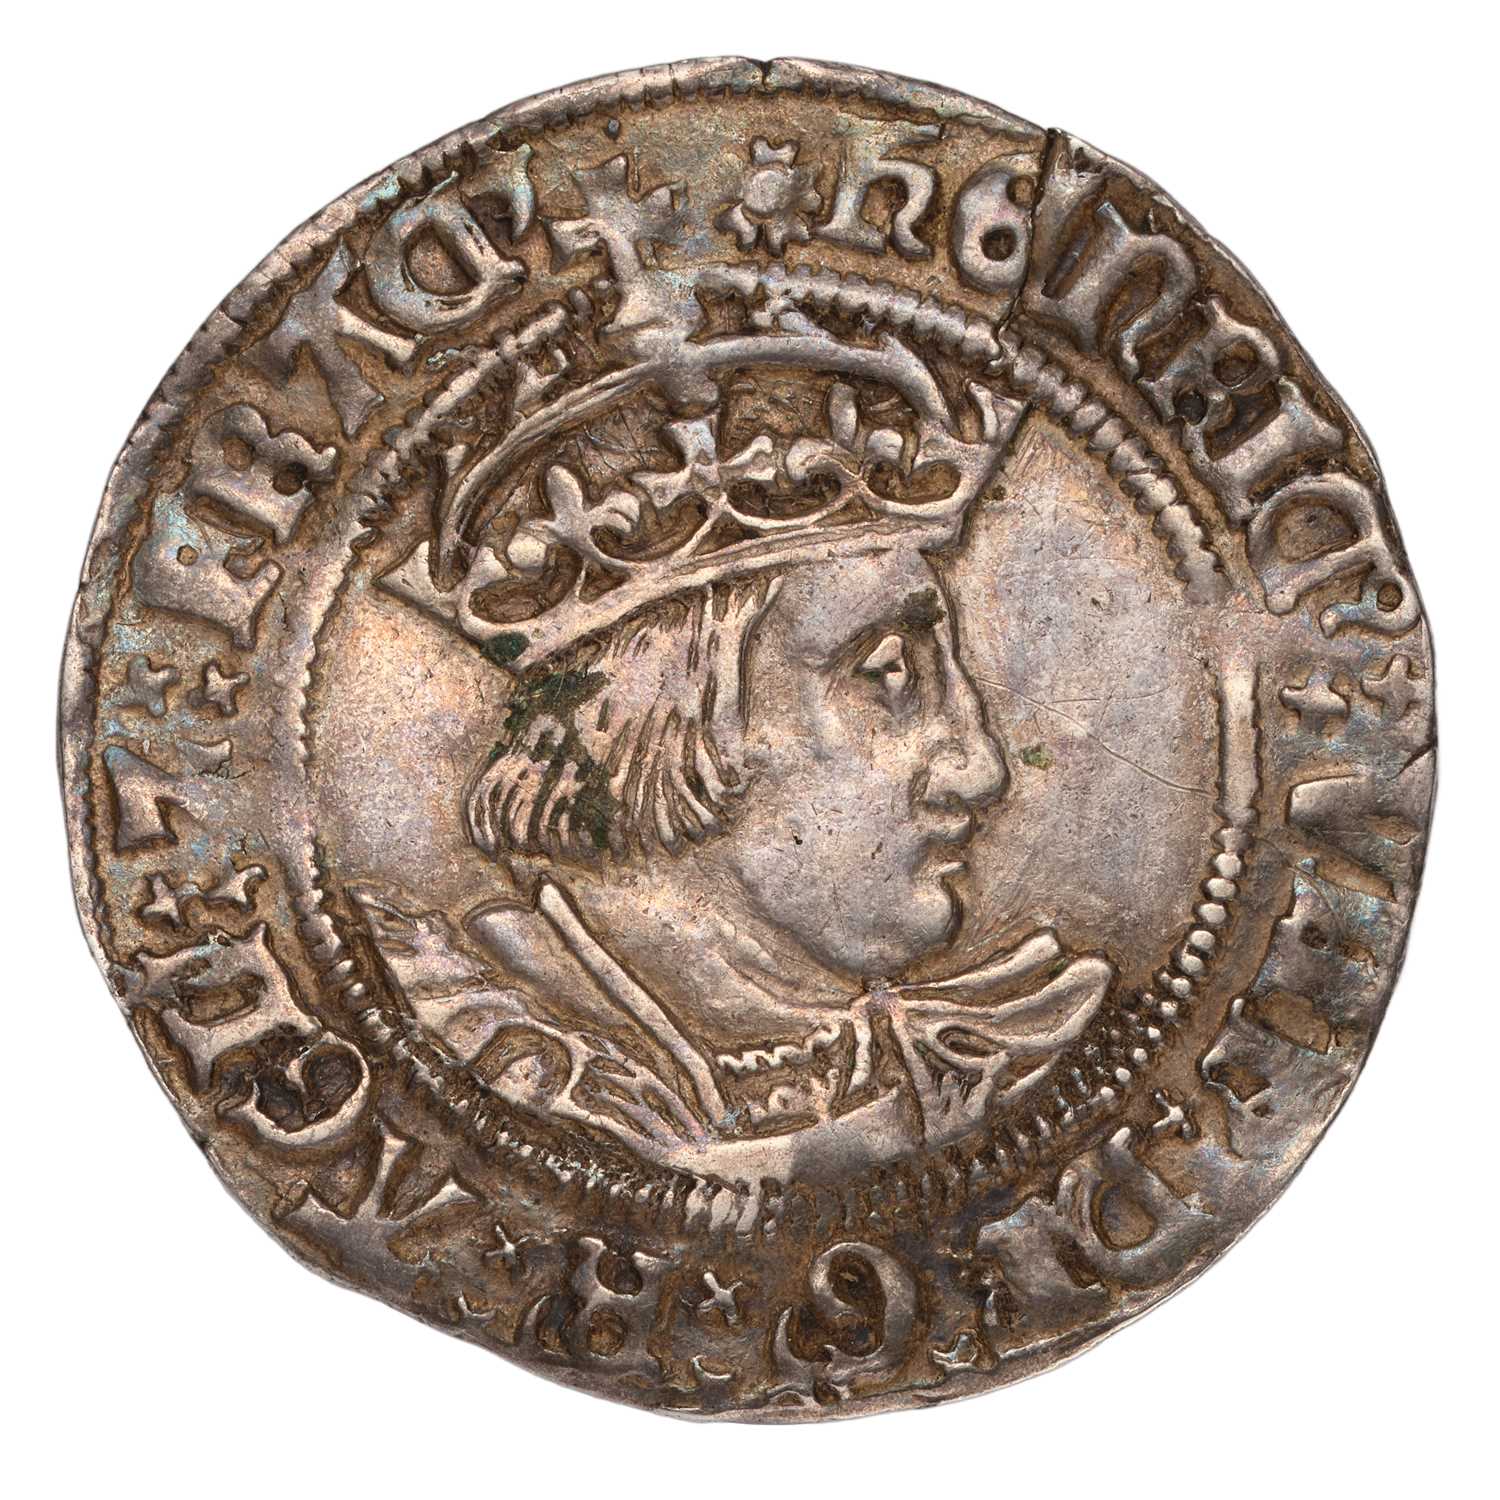 Henry VIII, Groat, Second Coinage (1526-44), 2.74g, mm. rose, Laker bust B, saltires in cross